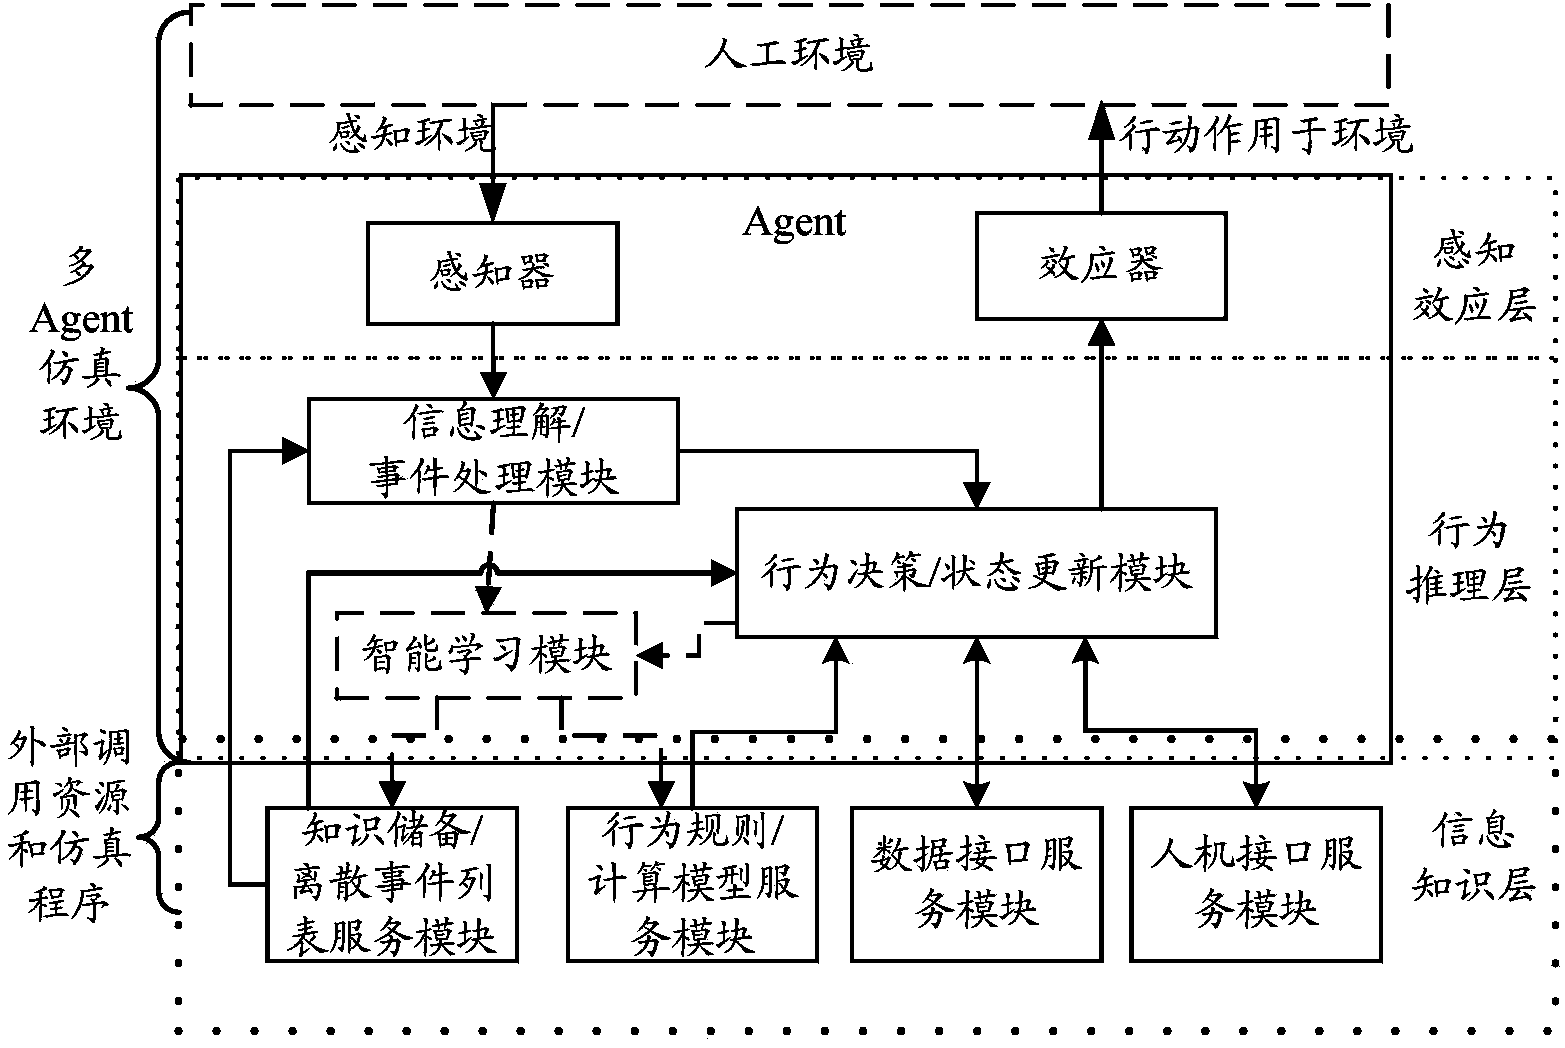 Artificial environment model, Agent model and modeling method of Agent model